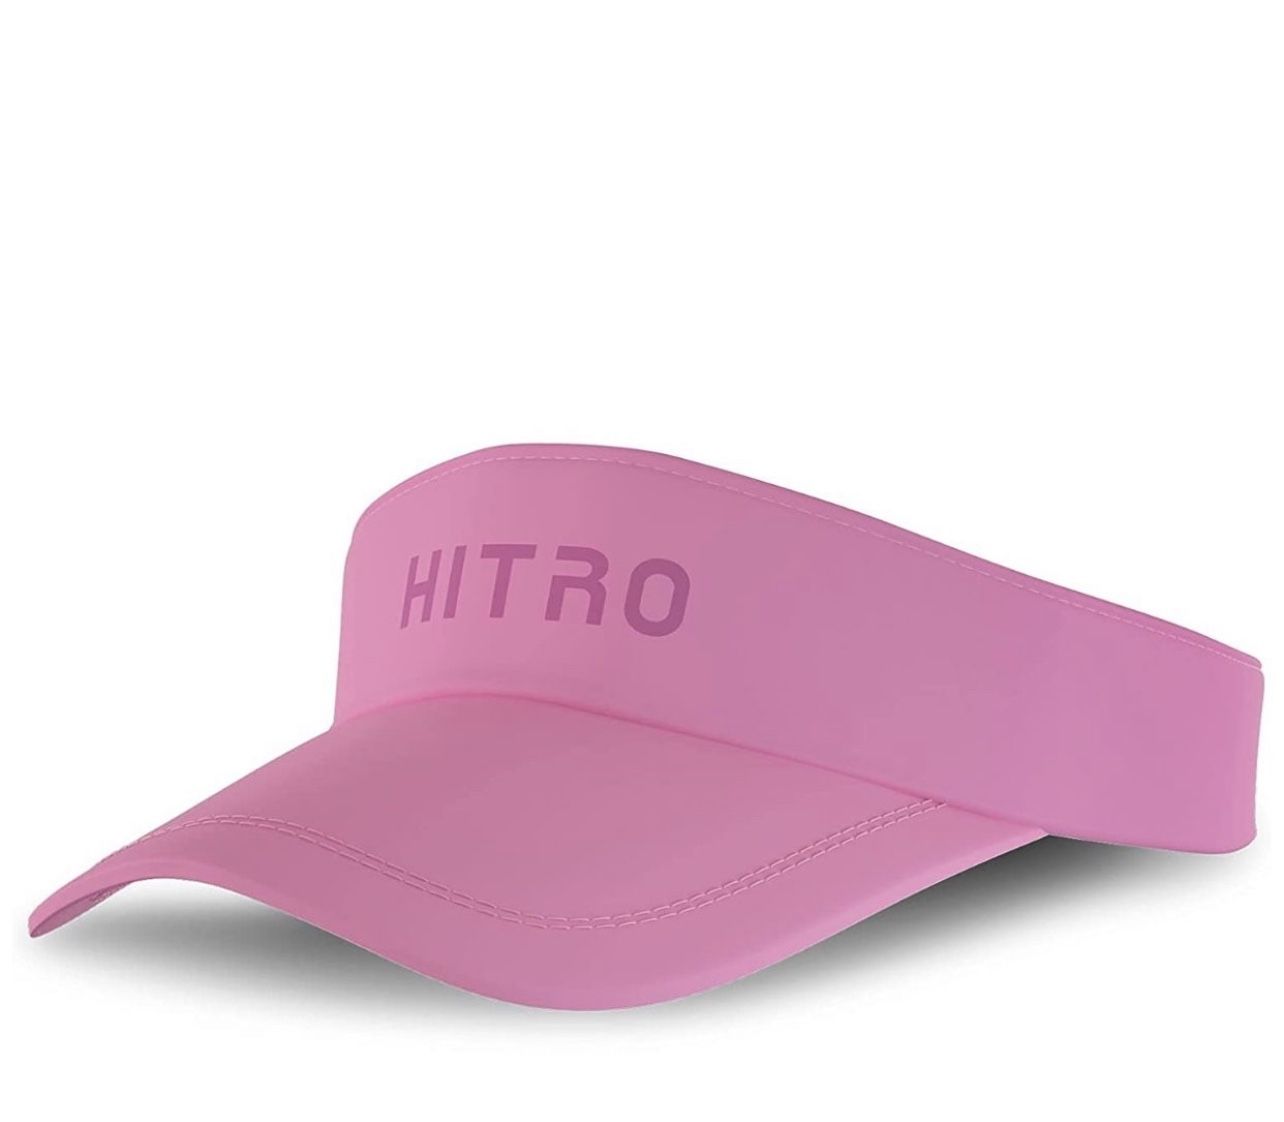 Visor with Removable Hat Top, (Pink)